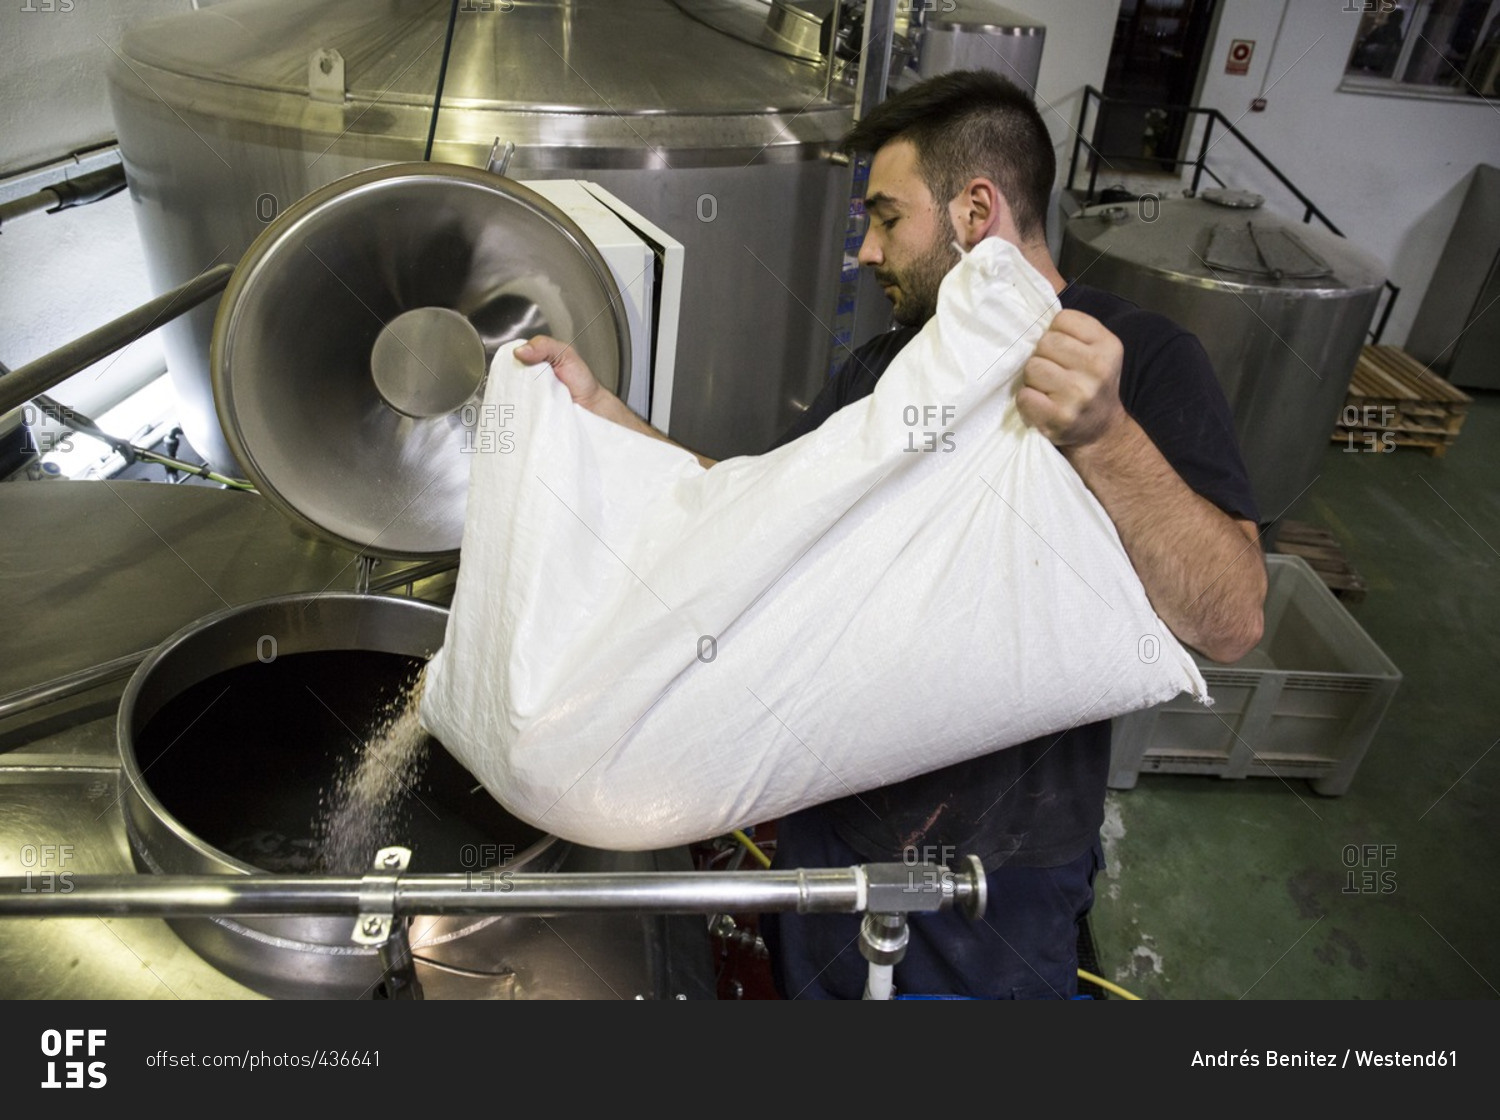 Man pouring a bag of malt in a beer tank in a factory